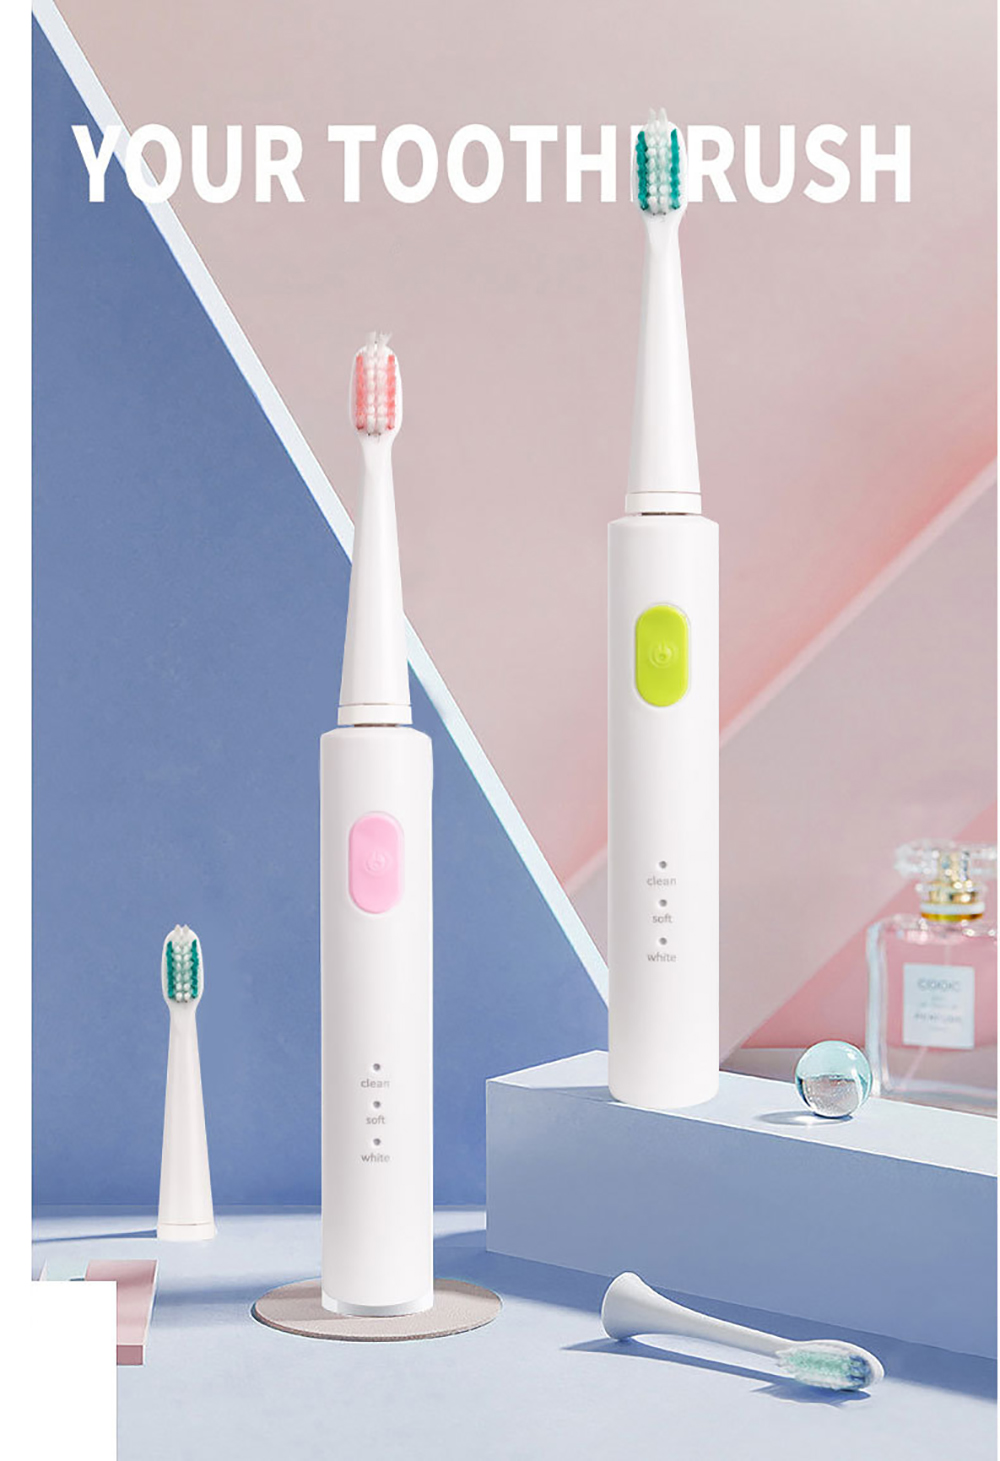 IPX7 Waterproof 3-mode Electric Toothbrush with 3 Brush Heads USB Fast Charging